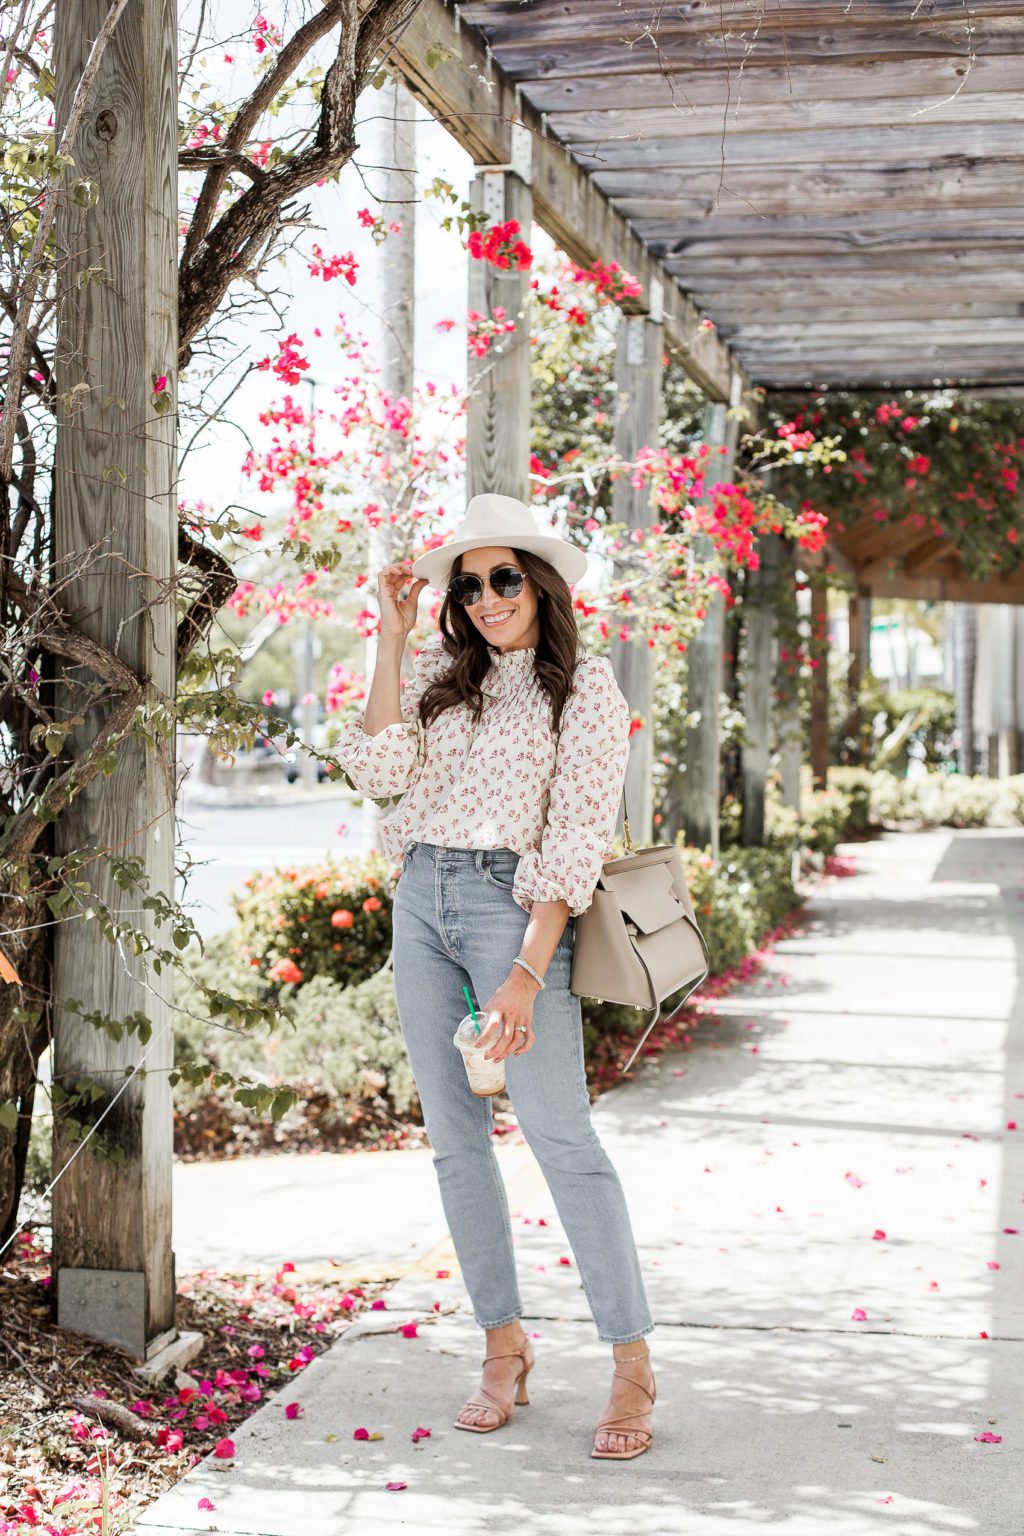 7 Fashion Trends for Spring - A Glam Lifestyle Blog